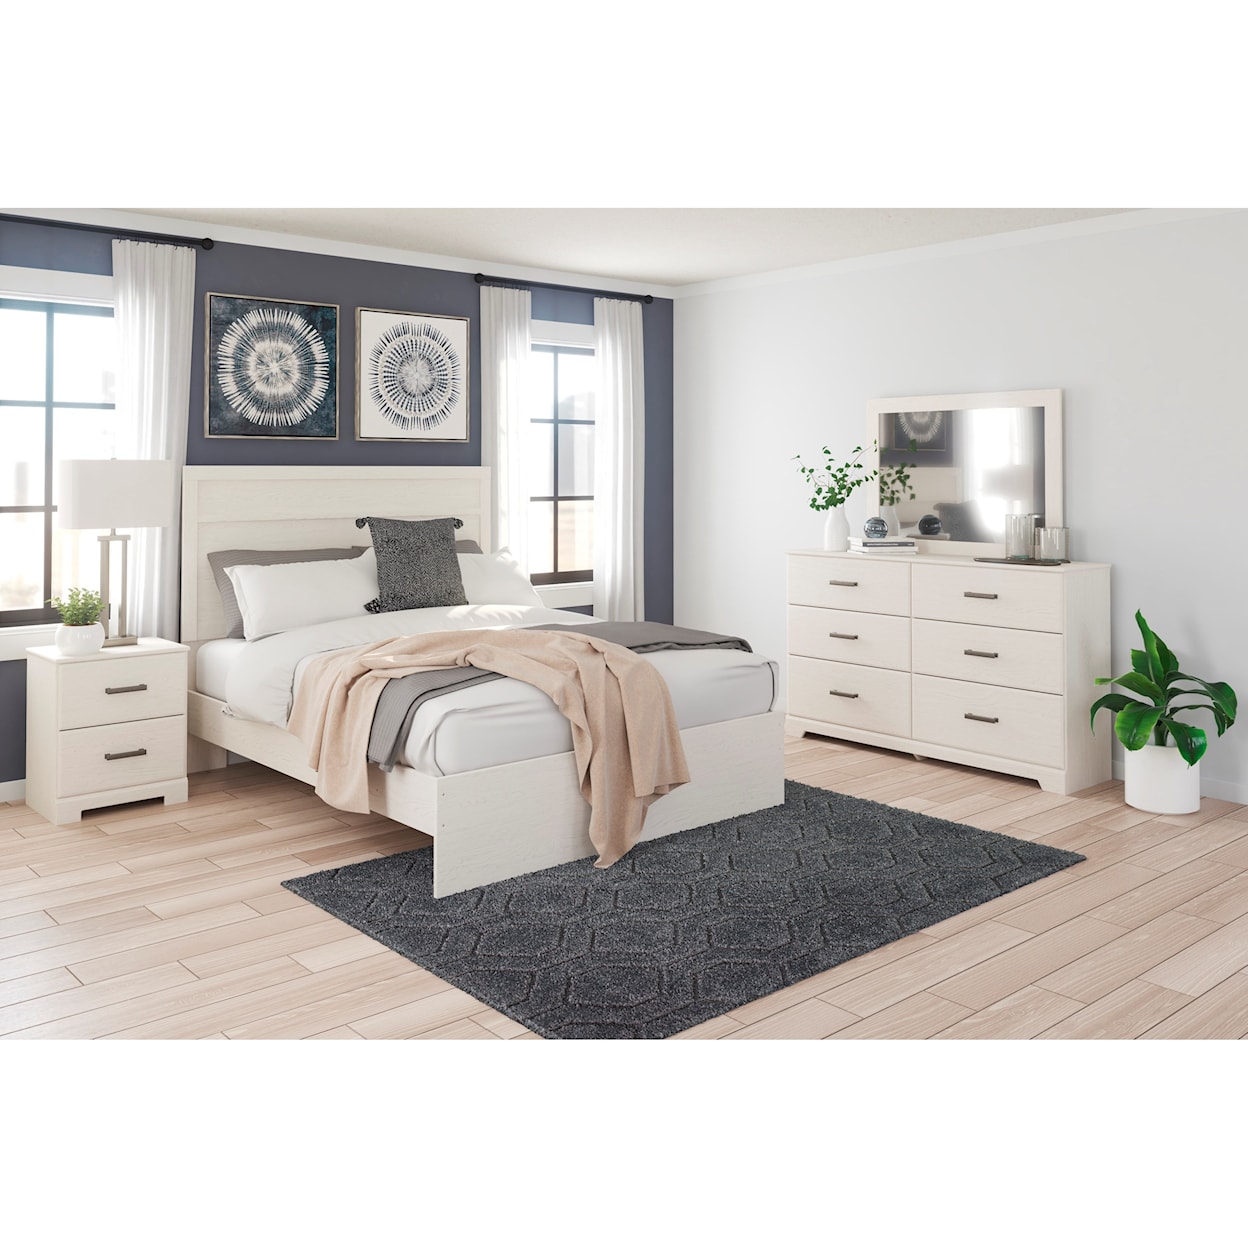 Signature Design by Ashley Furniture Stelsie Queen Bedroom Group